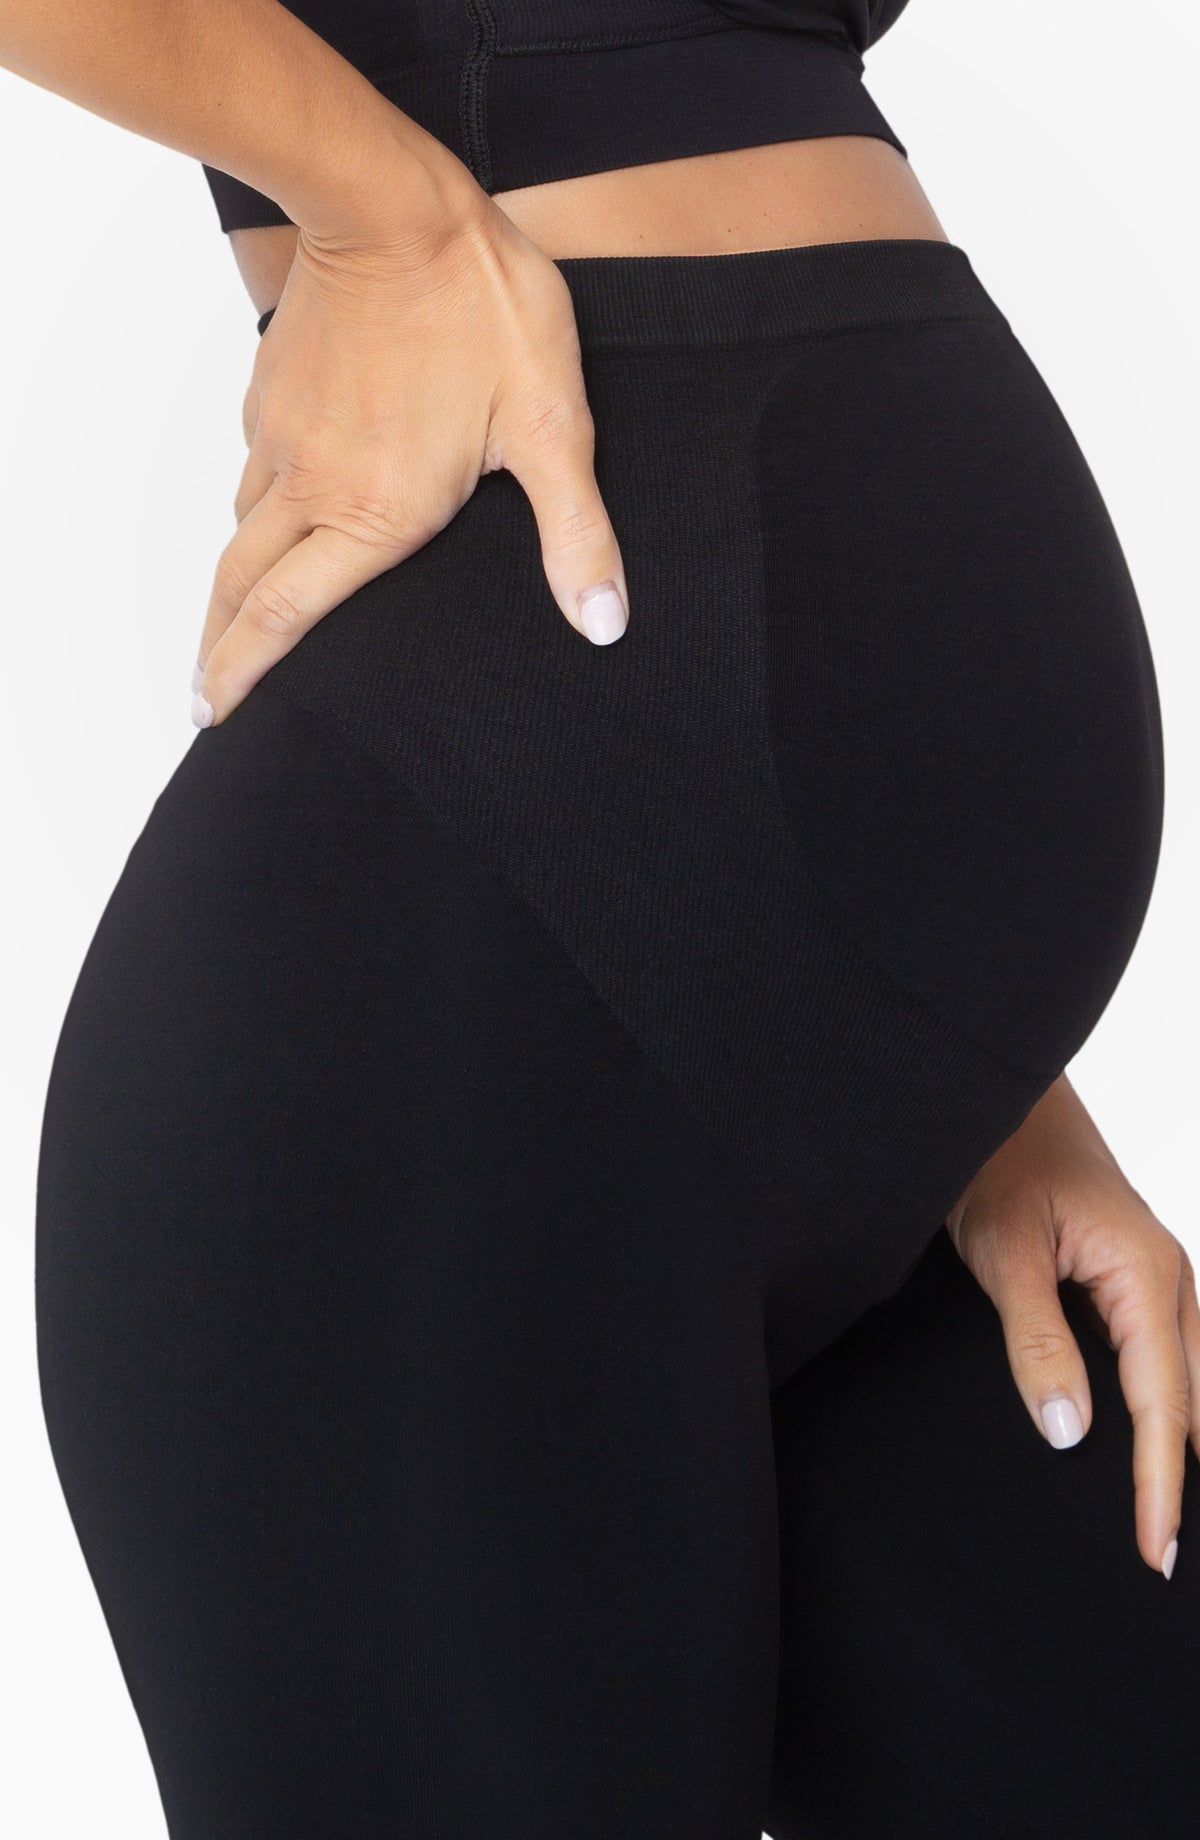 Maternity Bump Support™ Leggings: Belly Support For Pregnancy – Belly Bandit